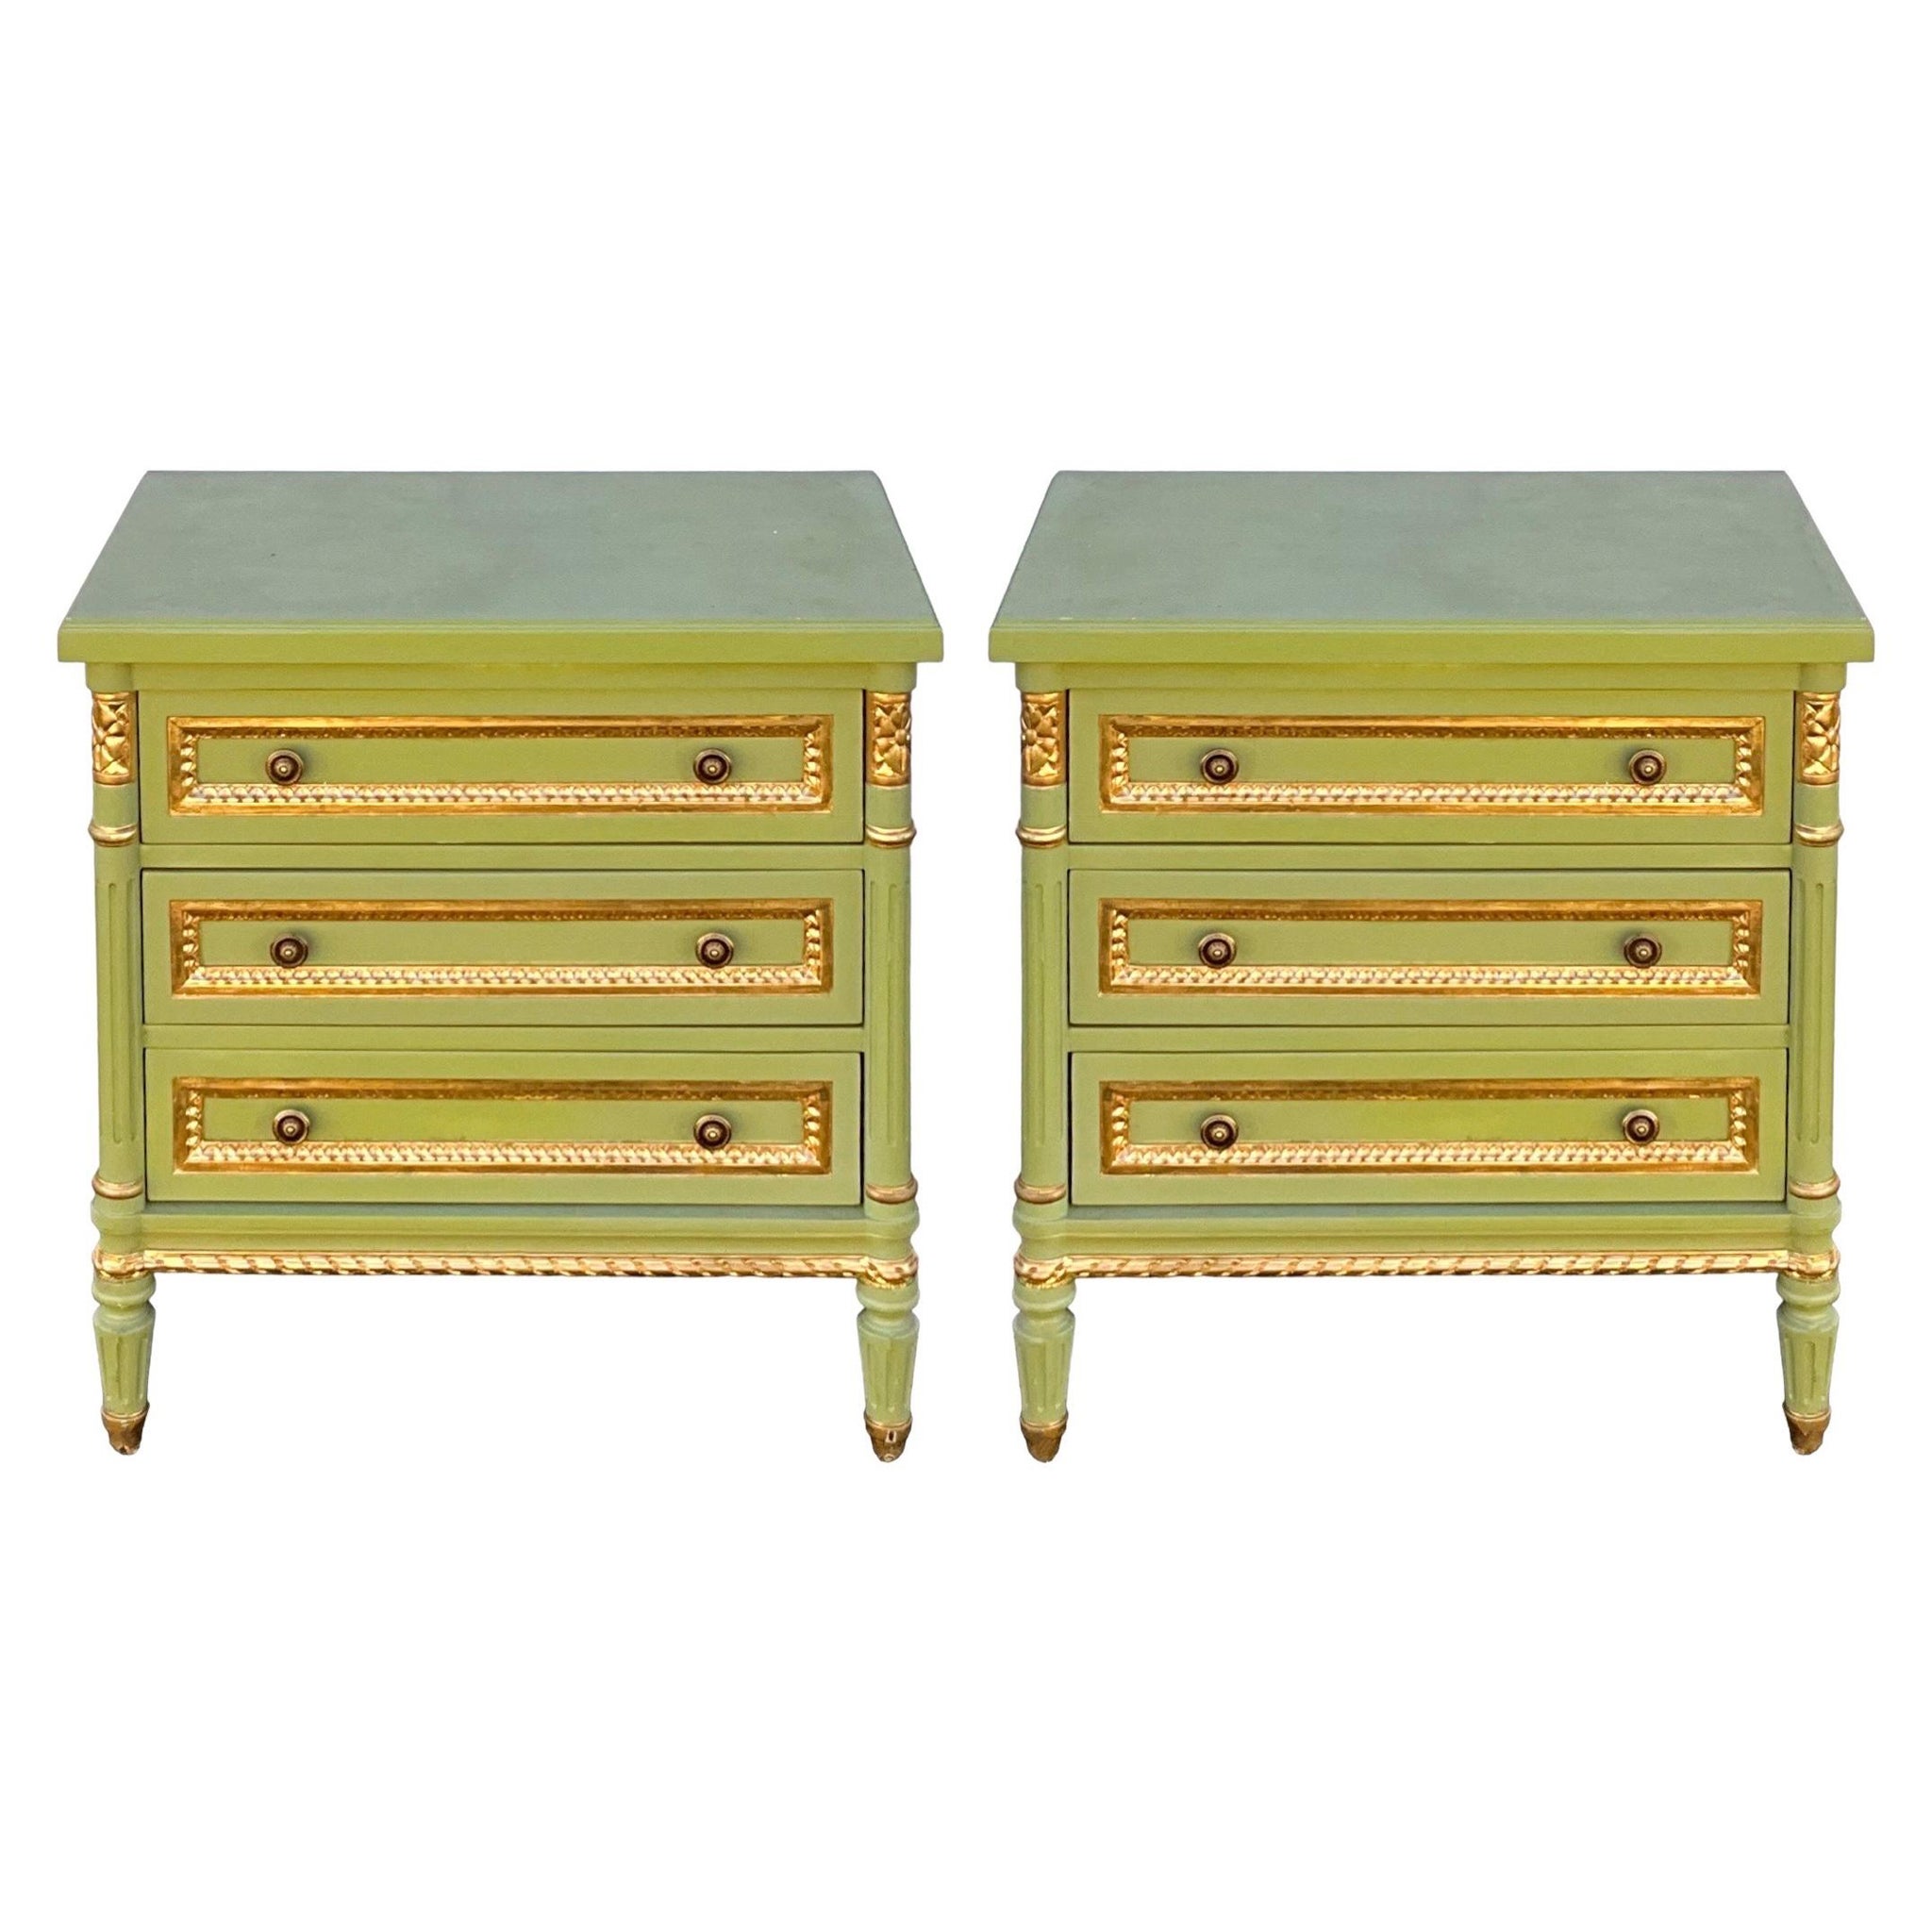 French Louis XVI Style Painted Chests / Commodes / Tables Att. To Julia Gray For Sale